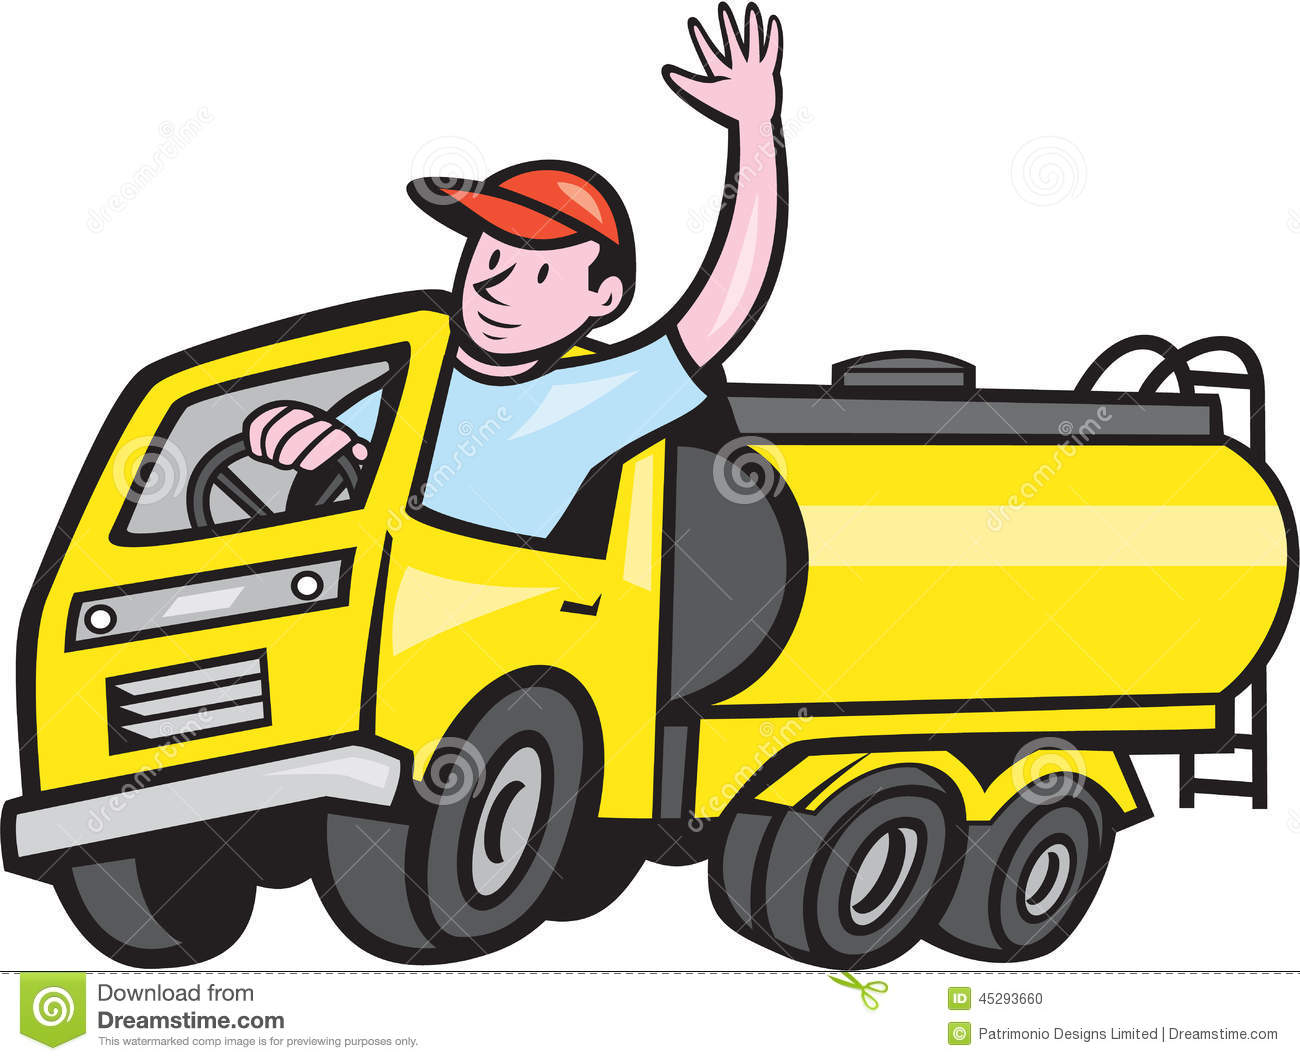 Illustration Of A Tanker Truck Petrol Tanker With Driver Waving Hello